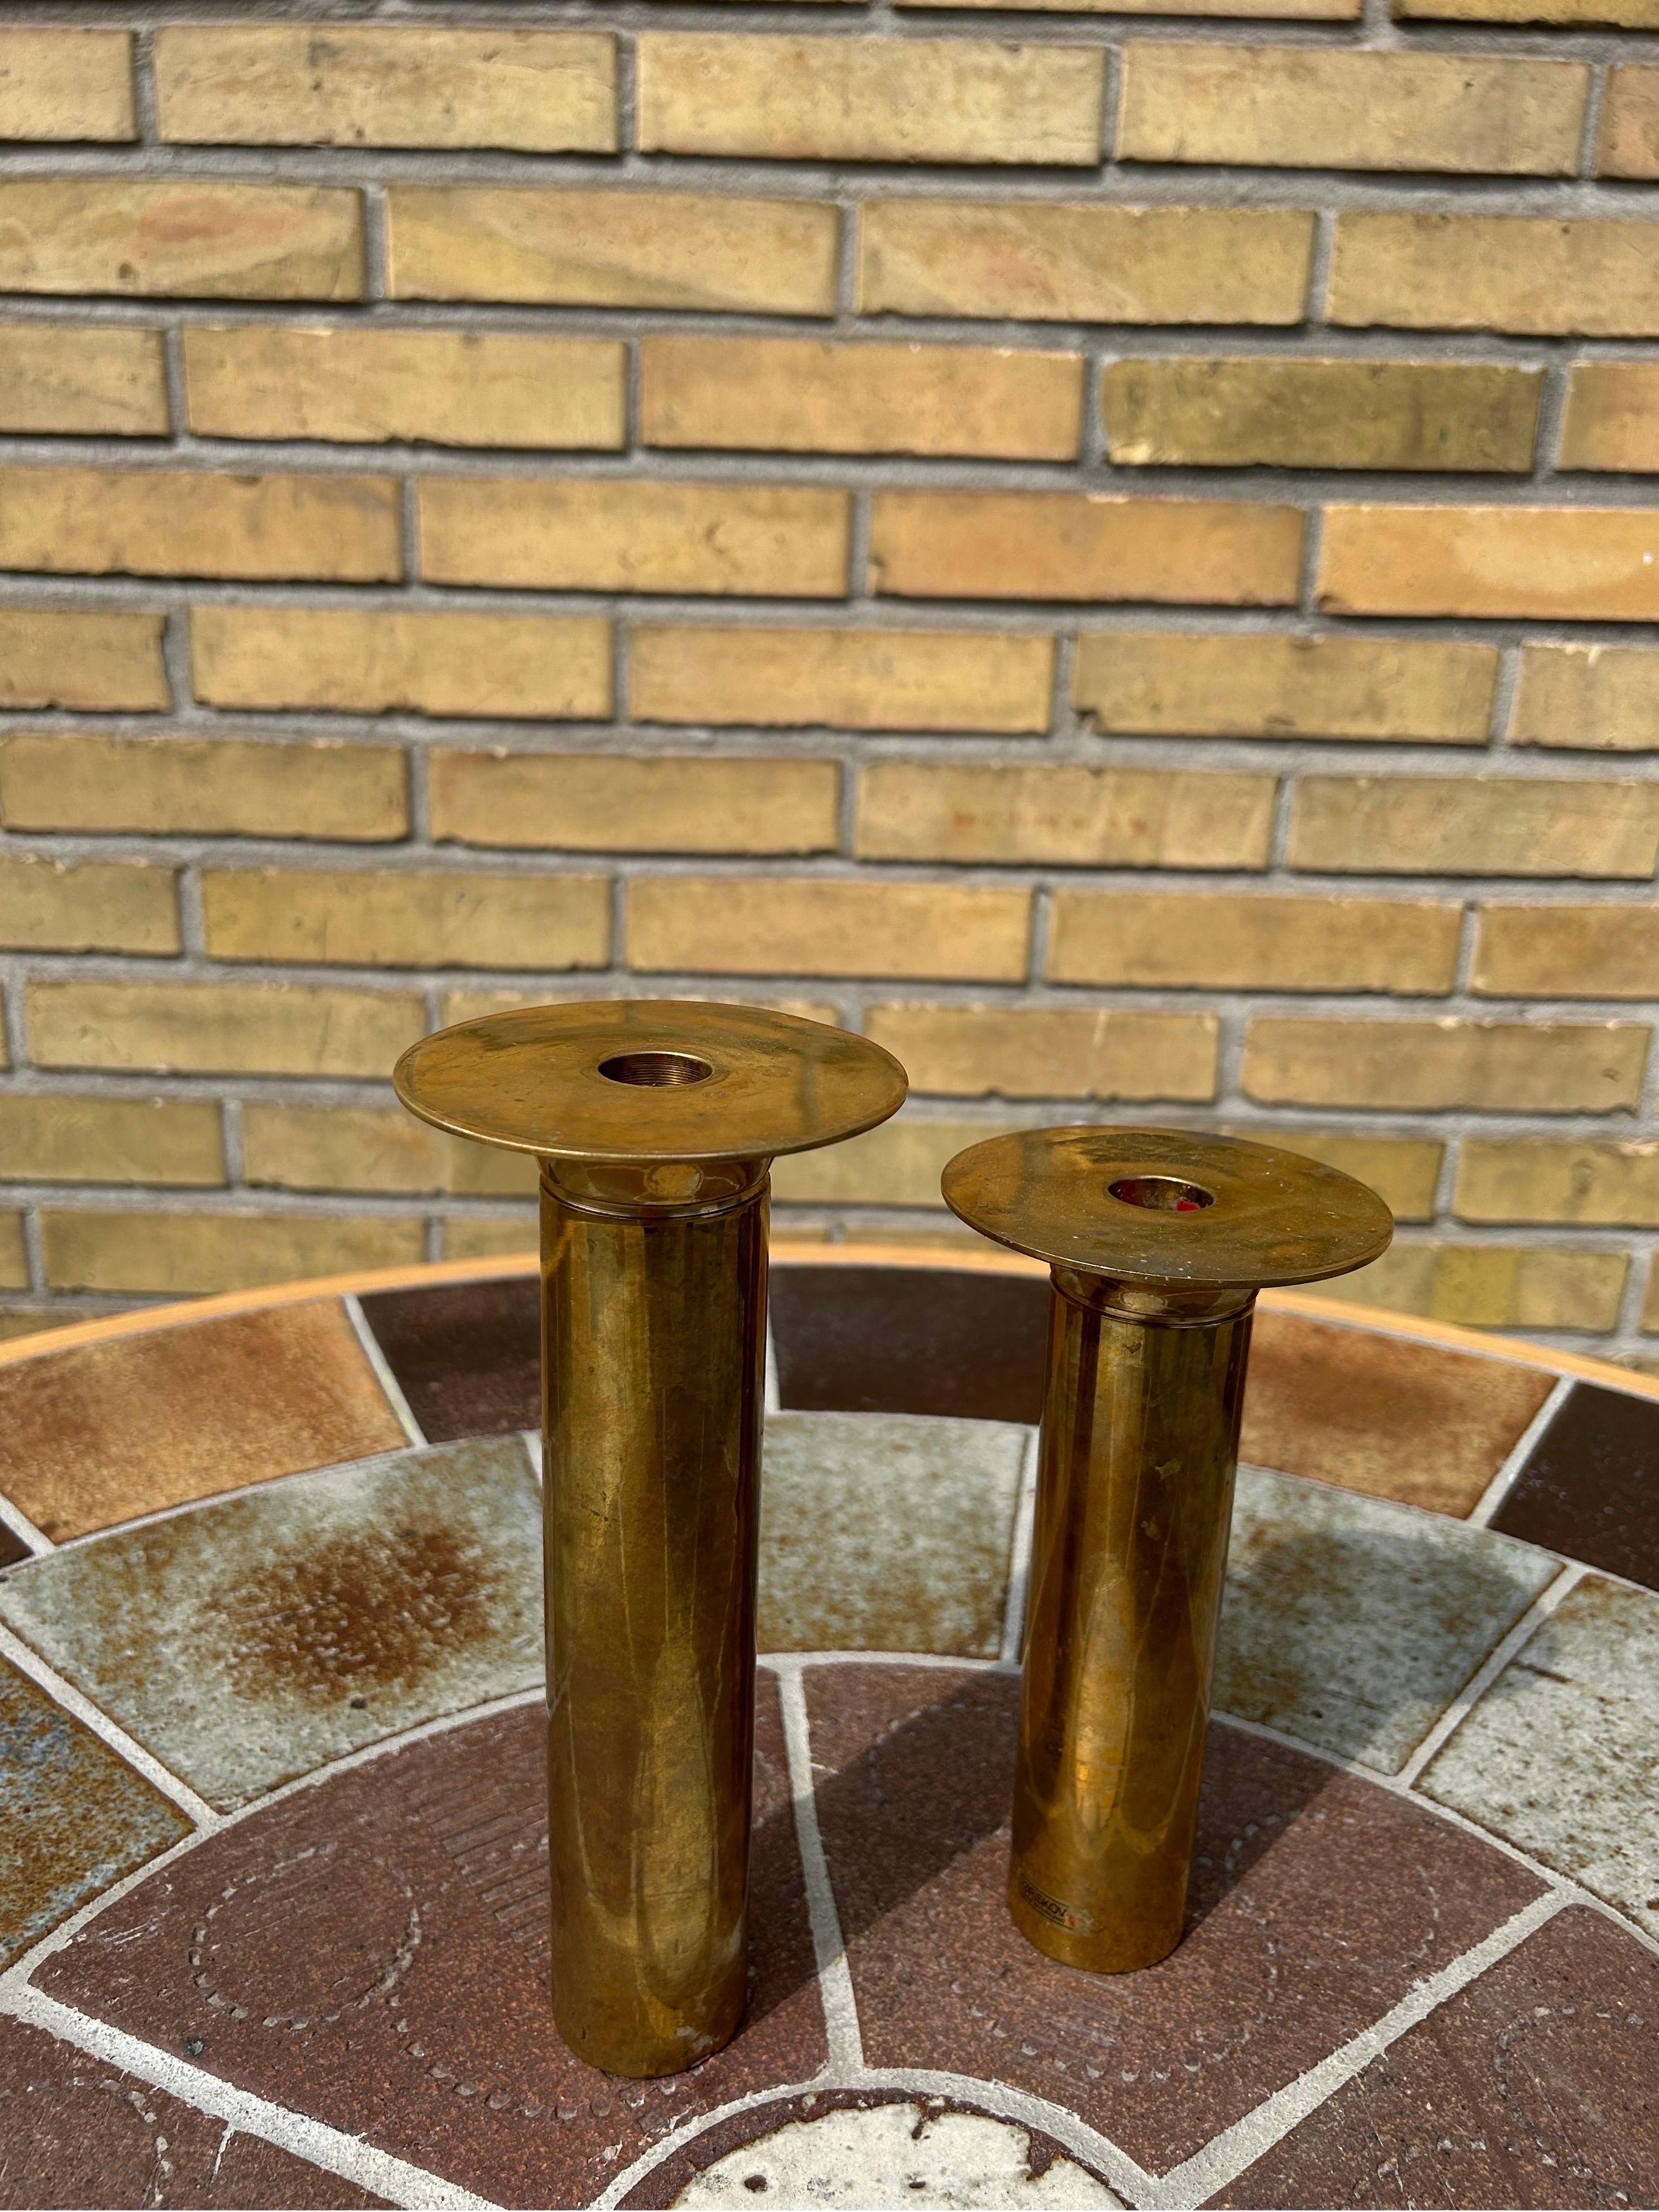 Rare and uncommon Pair of Torben Ørskov candle holders in patinaed brass, the candle holders are designed by danish designer and manufacturer Torben Ørskov In solid brass.

The candle holders are in good condition with a beautiful patina which has